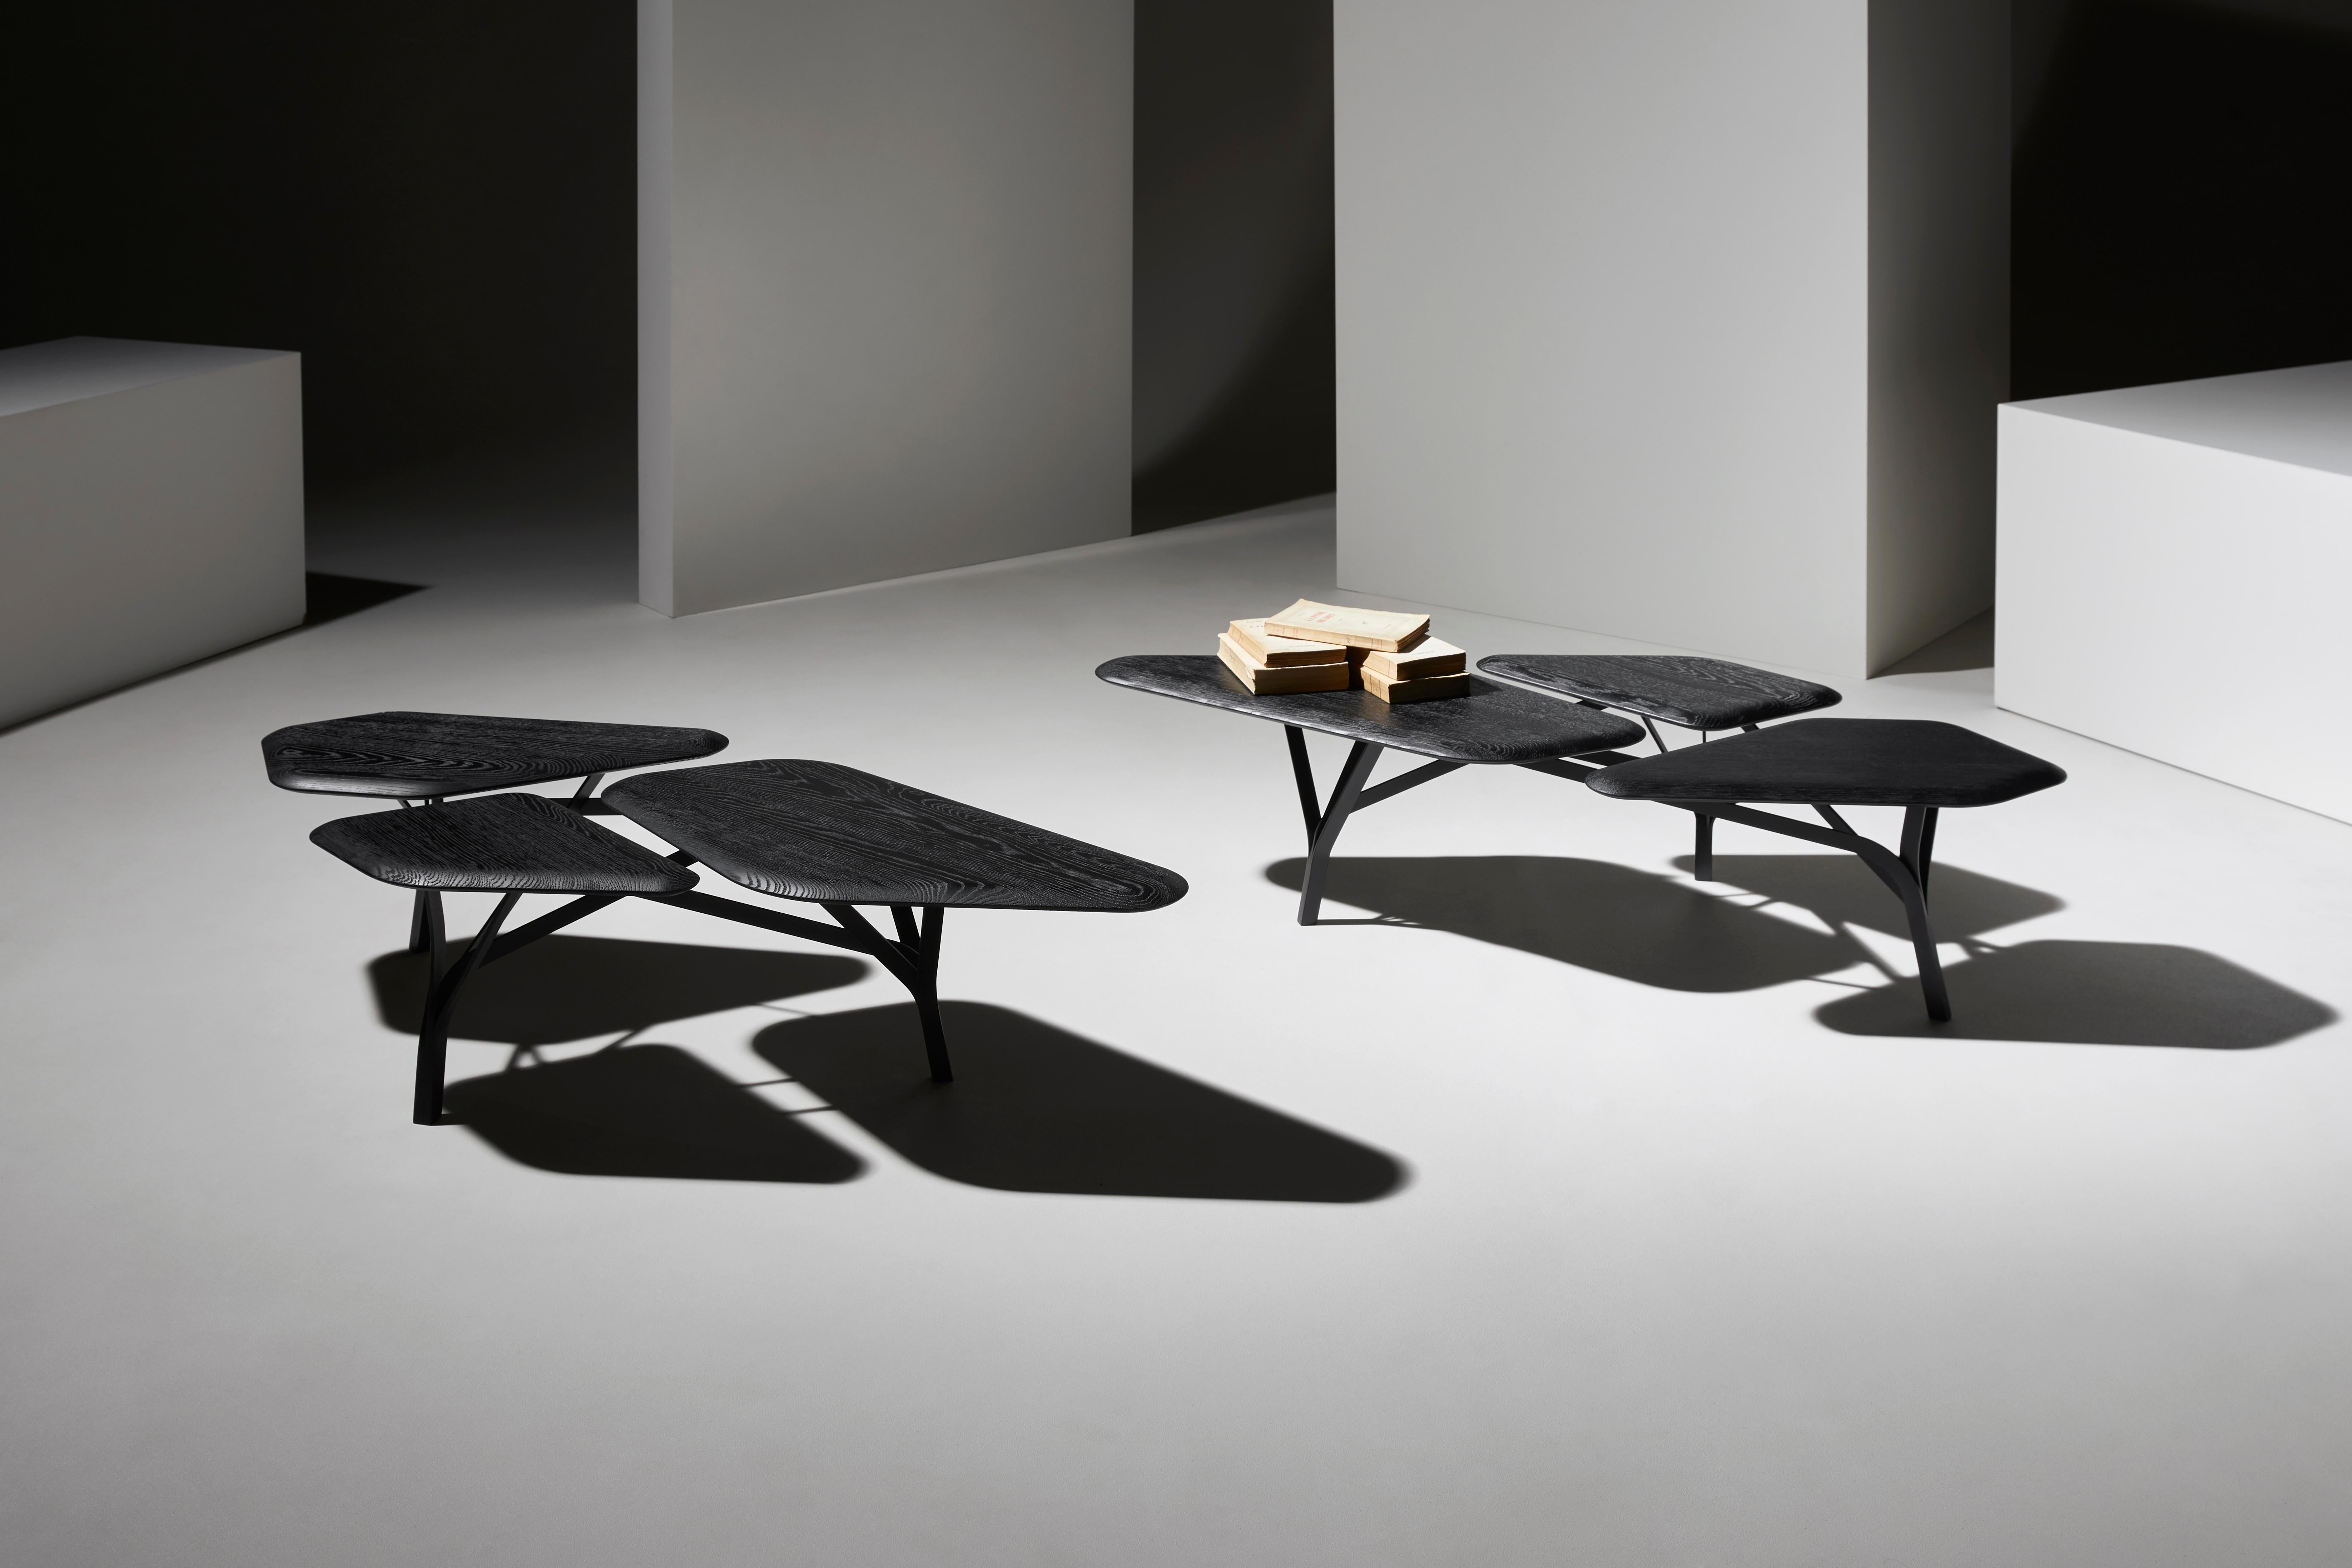 The Borghese table, as the eponymous sofa, is inspired by the umbrella pines at the Villa Borghese gardens in Rome.
The characteristic network of branches is translated as a graphic steel framework supporting a trio of solid wood tops.
The